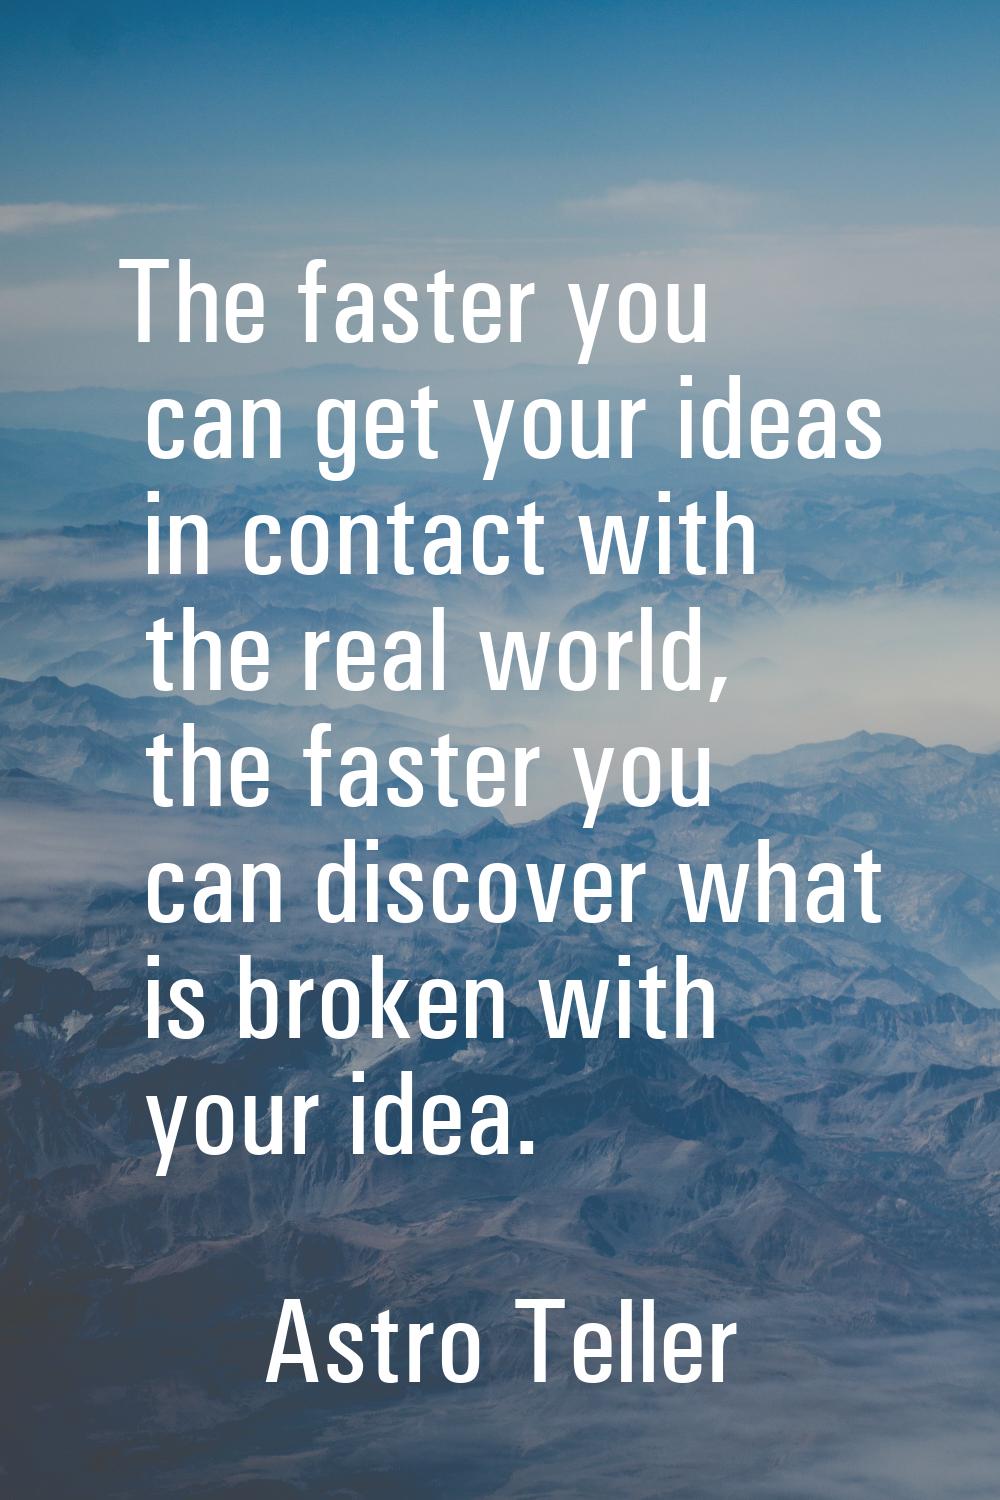 The faster you can get your ideas in contact with the real world, the faster you can discover what 